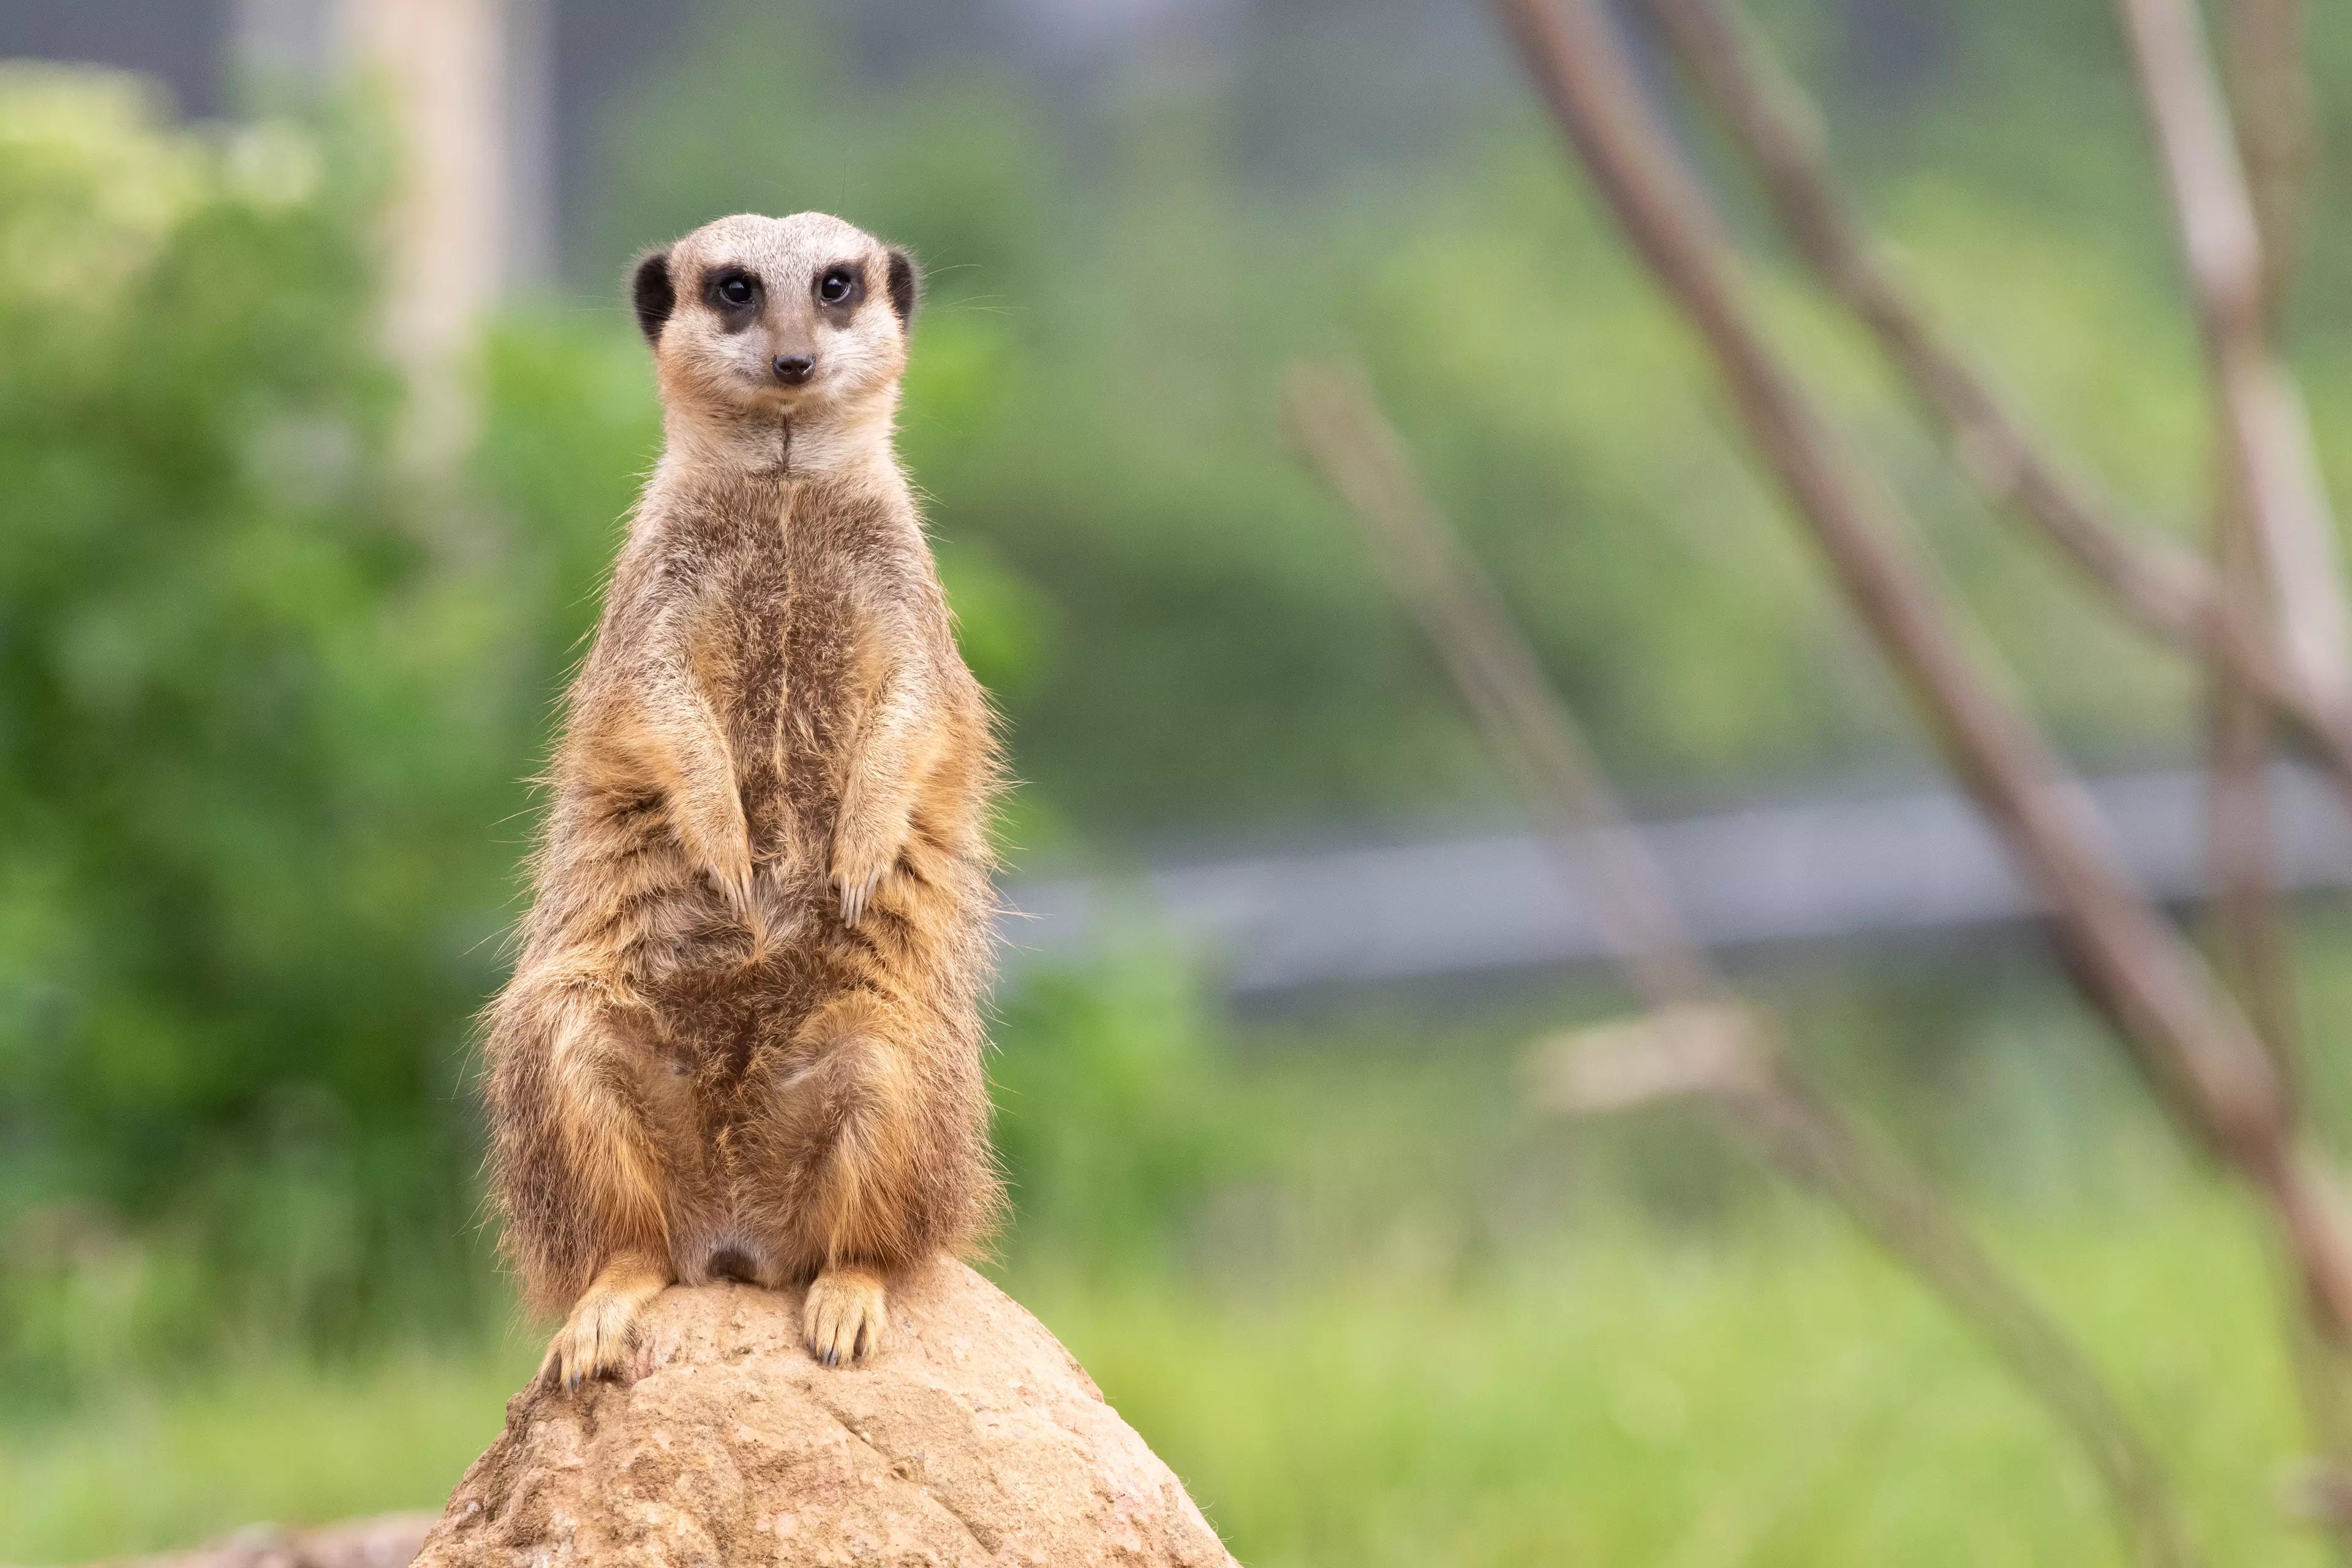 This week Chester Zoo created a JustGiving page to help raise funds towards the £465k a month it needs to look after its animals. (